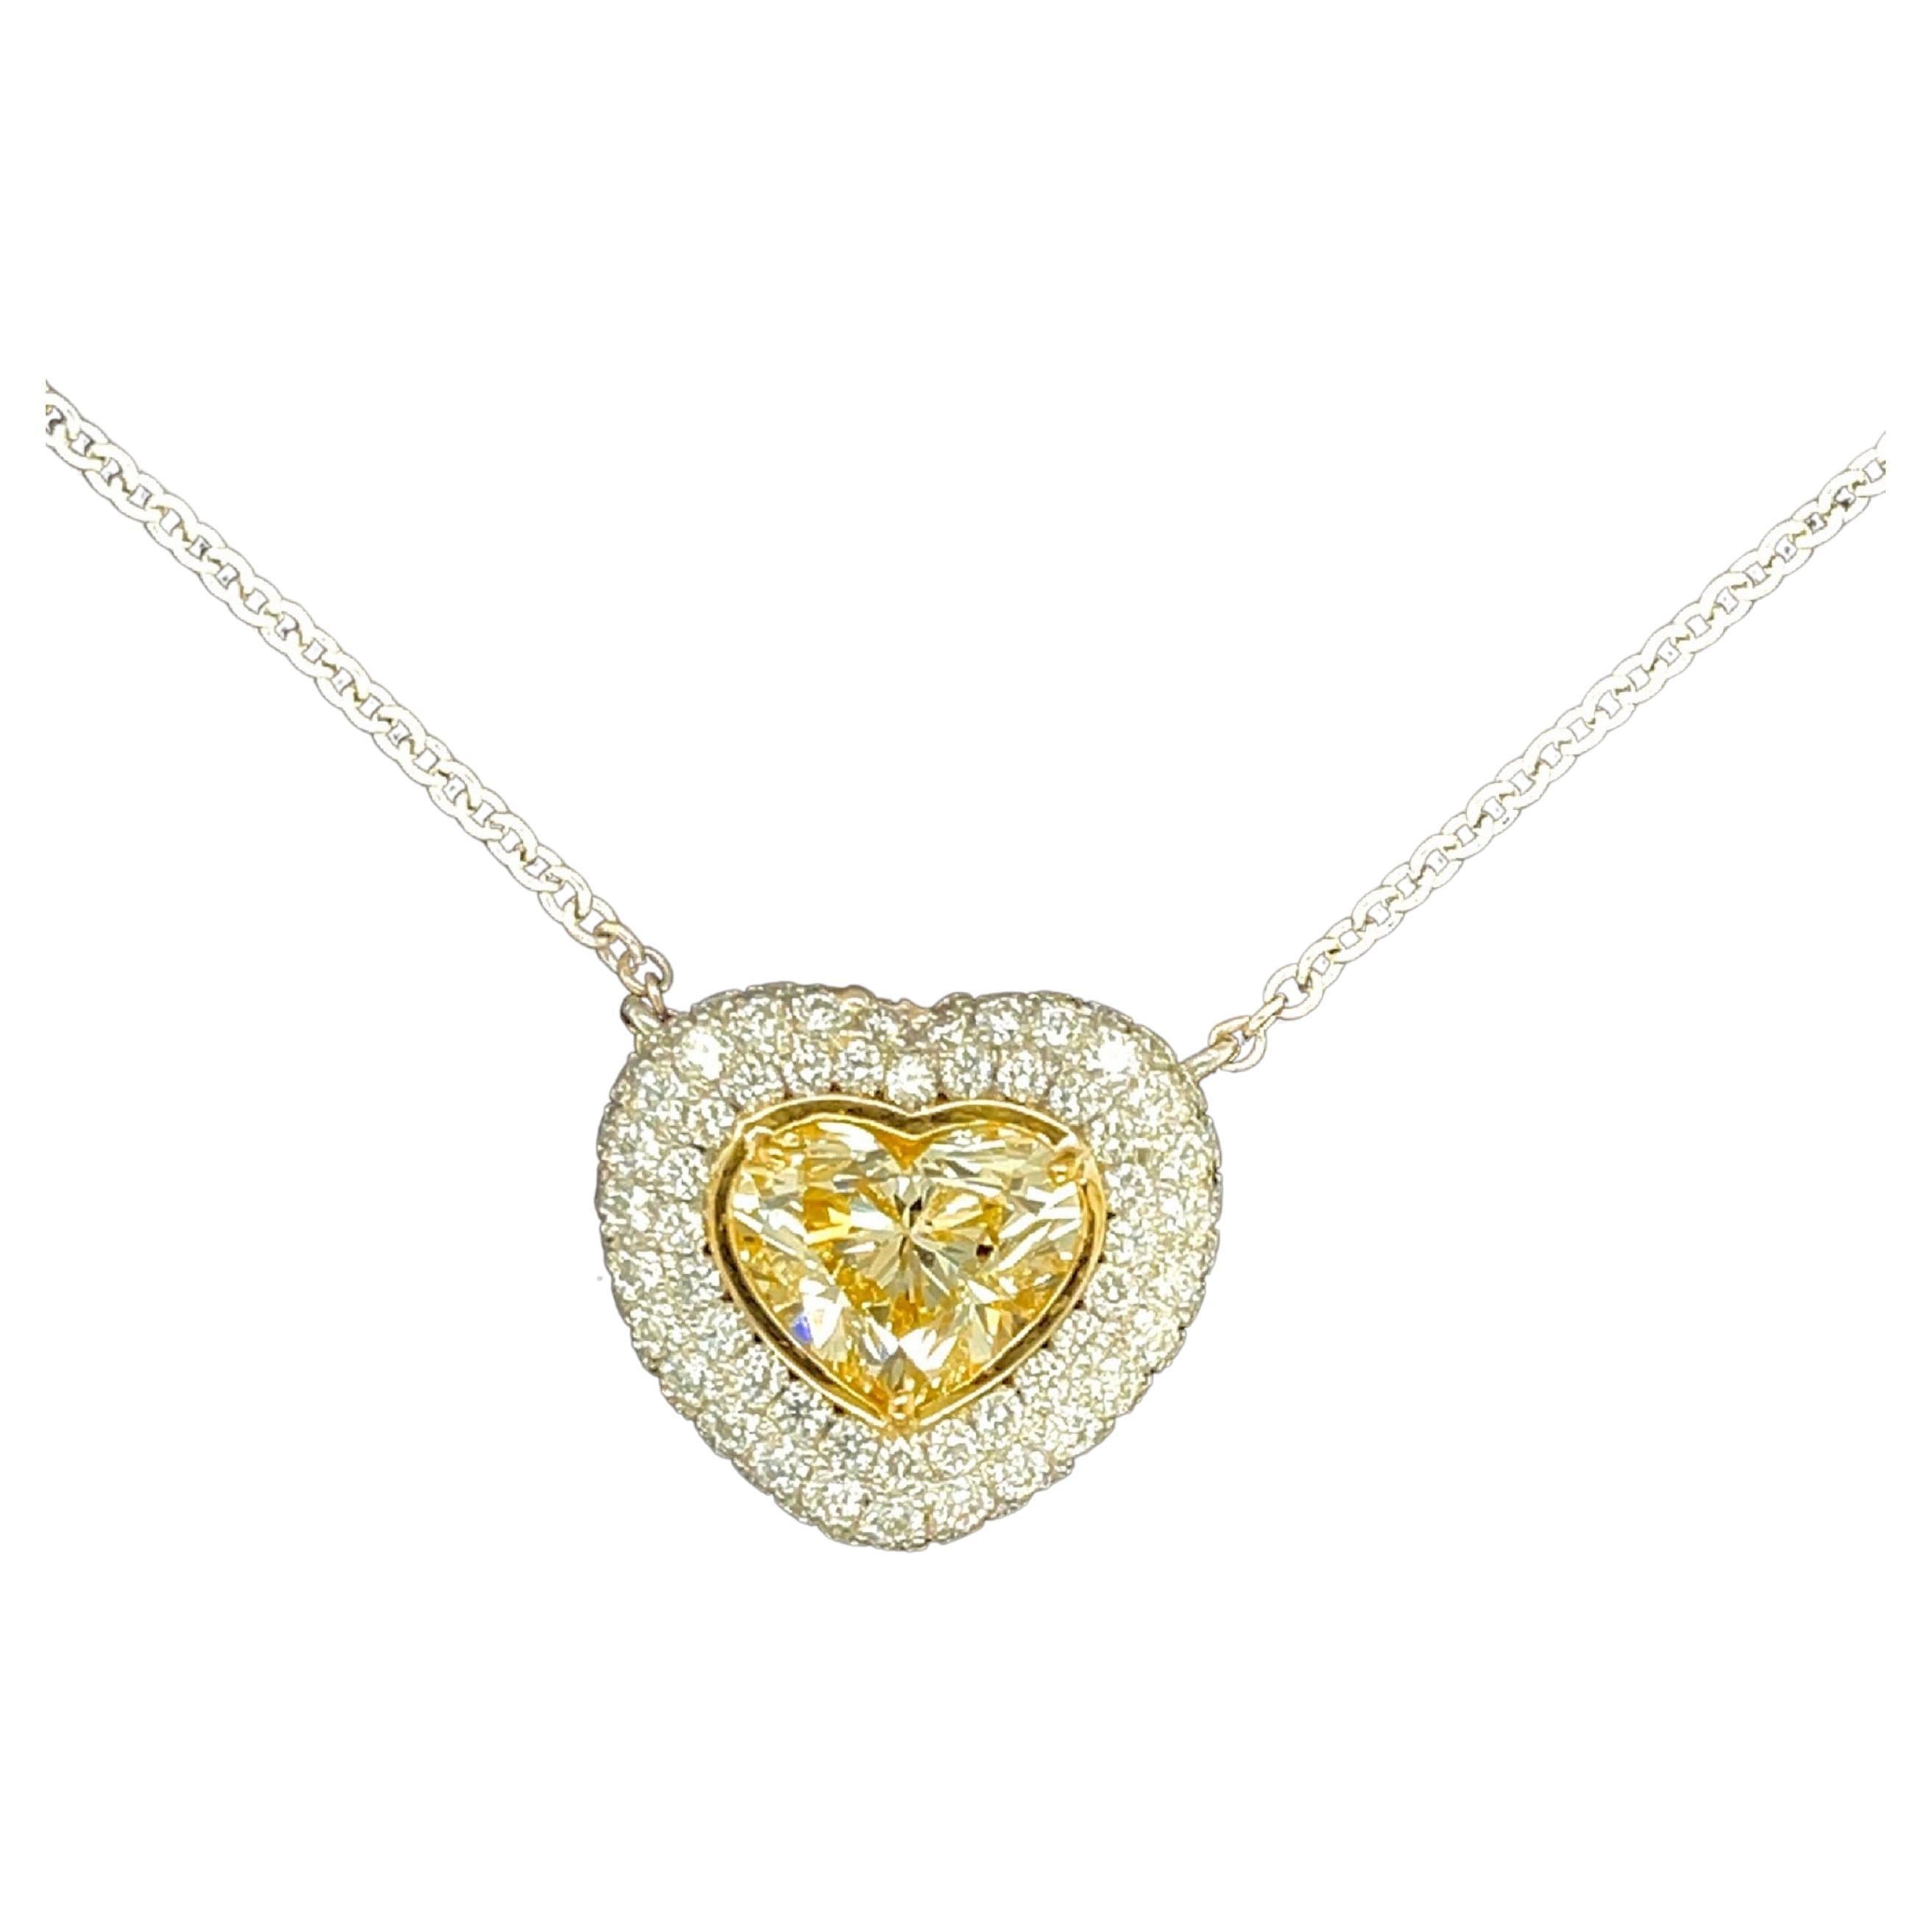 Heart Shape Yellow Diamond Pendant 2.50 carats Platinum/18KYG

Spectacular. Set in Platinum/18KYG

Stunning! Looks like nice FANCY YELLOW.

Heart Shape weighs 2.50 carats

W-X  Color VS2 Clarity

With GIA Certificate # 5212163136

Small Round